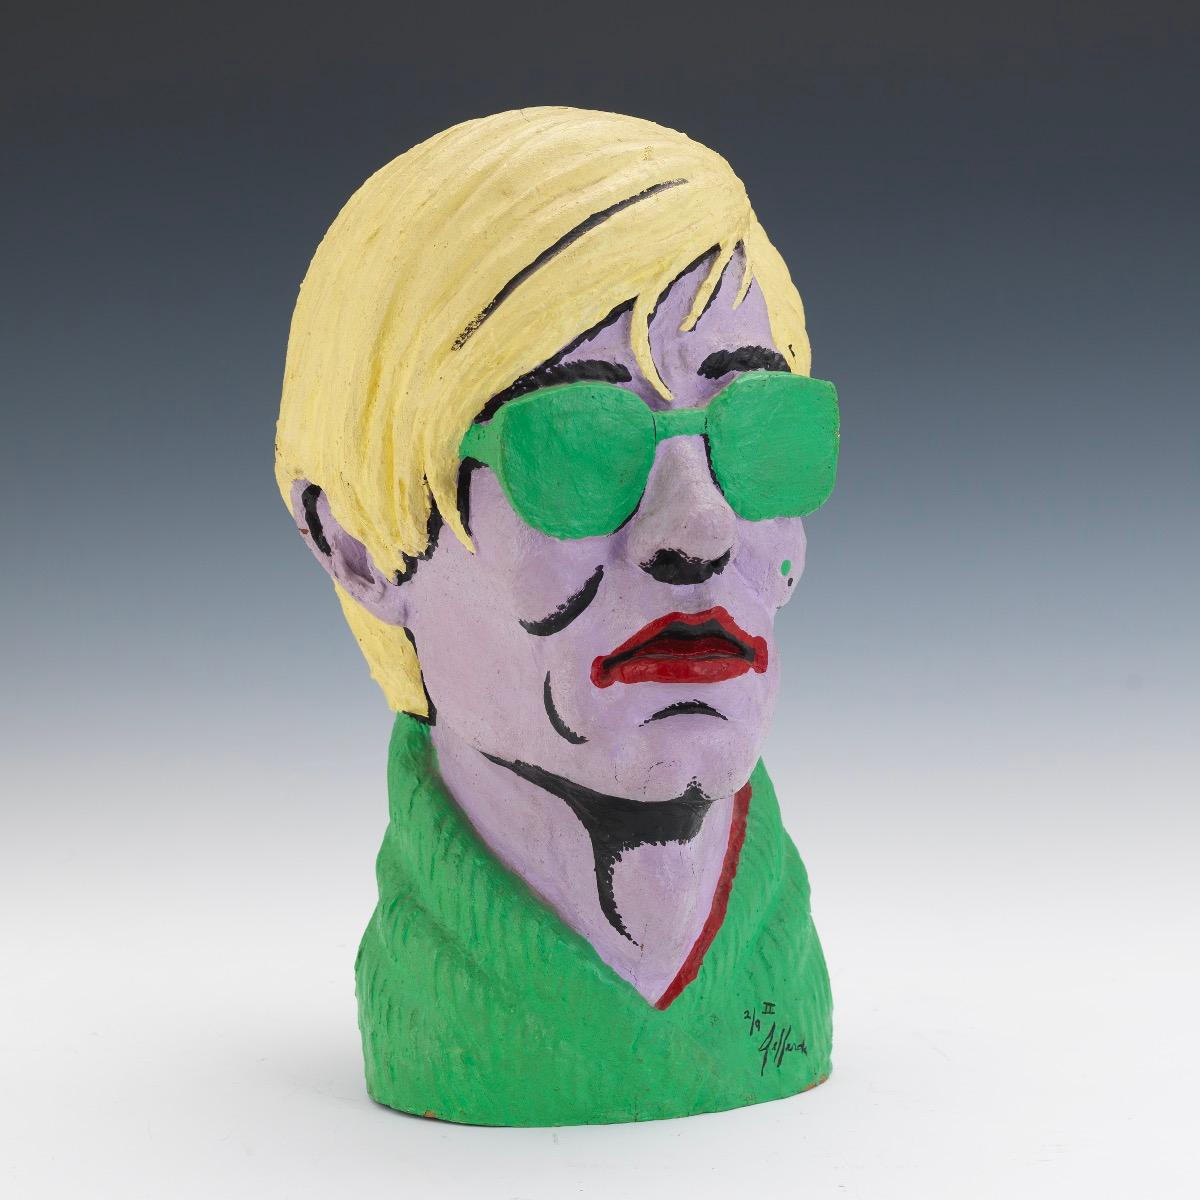 20th Century Limited Edition American Polychromed Rubber Bust of Andy Warhol by Jefferds